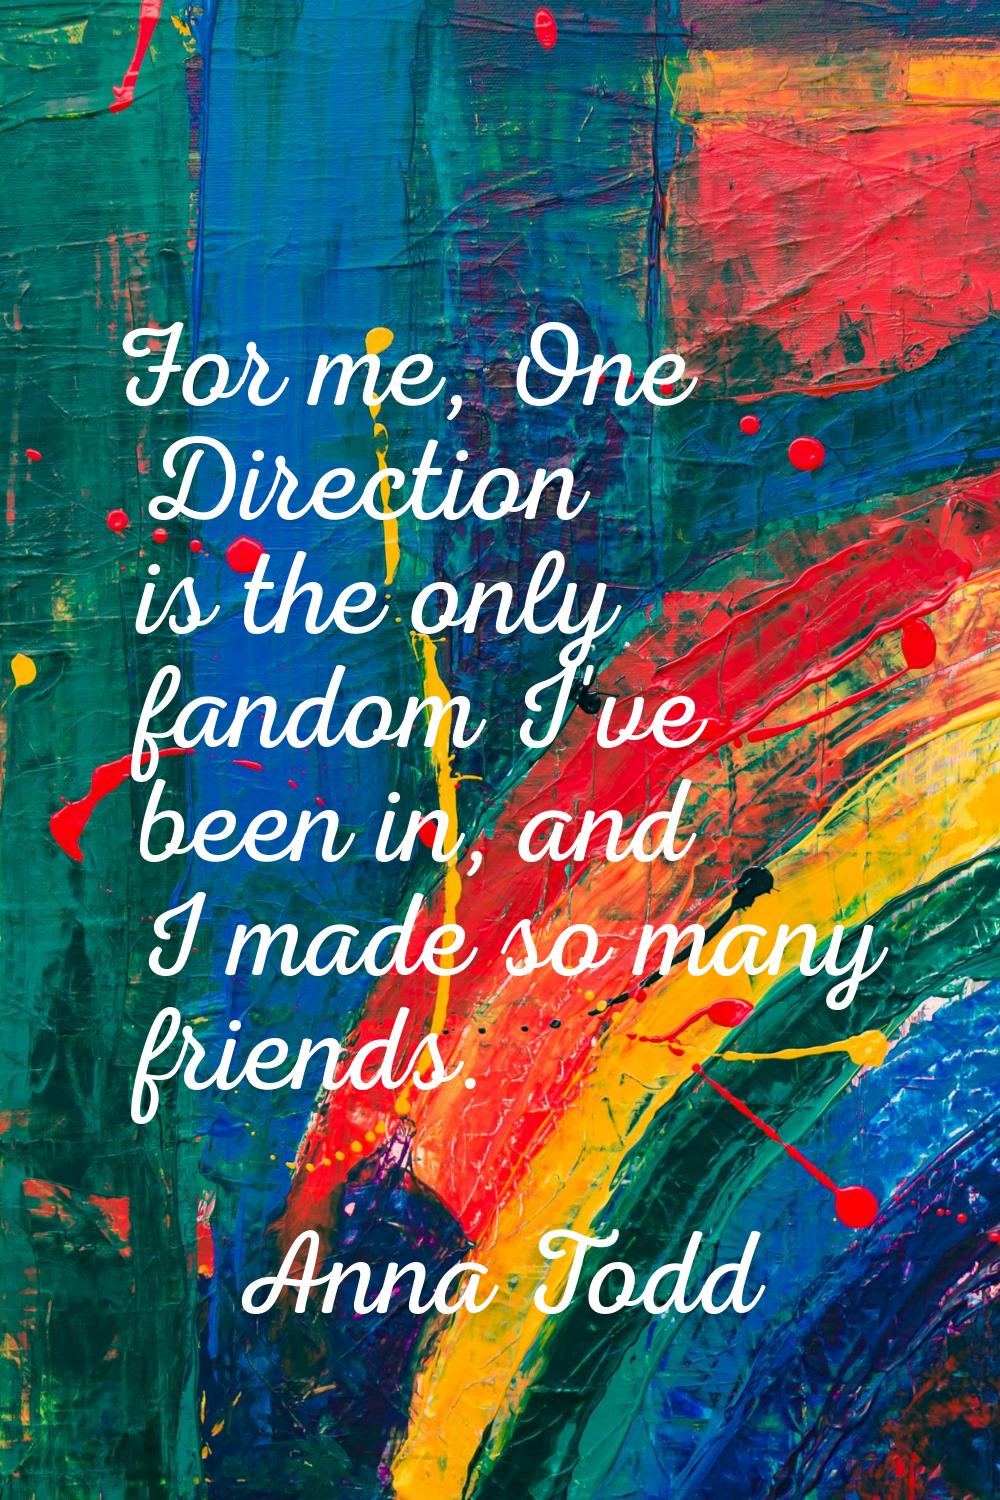 For me, One Direction is the only fandom I've been in, and I made so many friends.